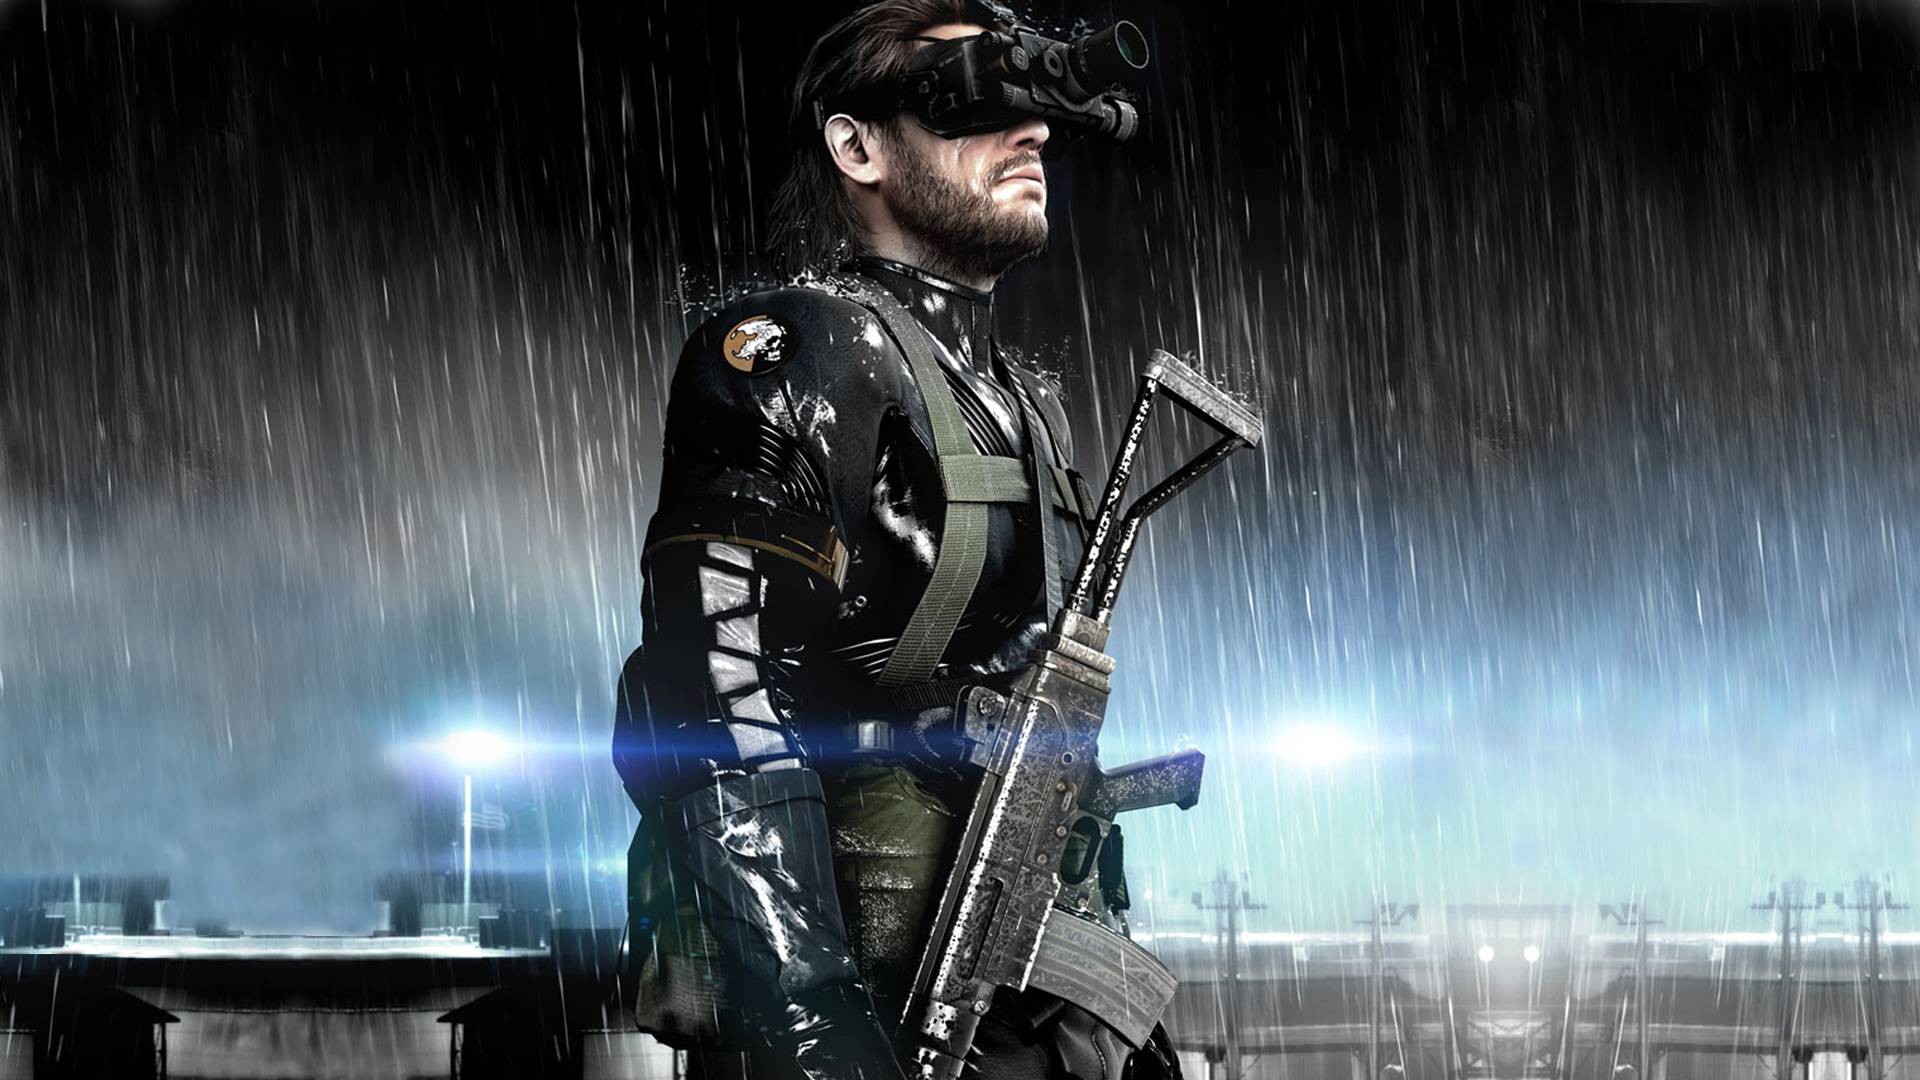 1920x1080 Metal Gear Solid Ground Zeroes Wallpapers In HD Â« GamingBolt.com .